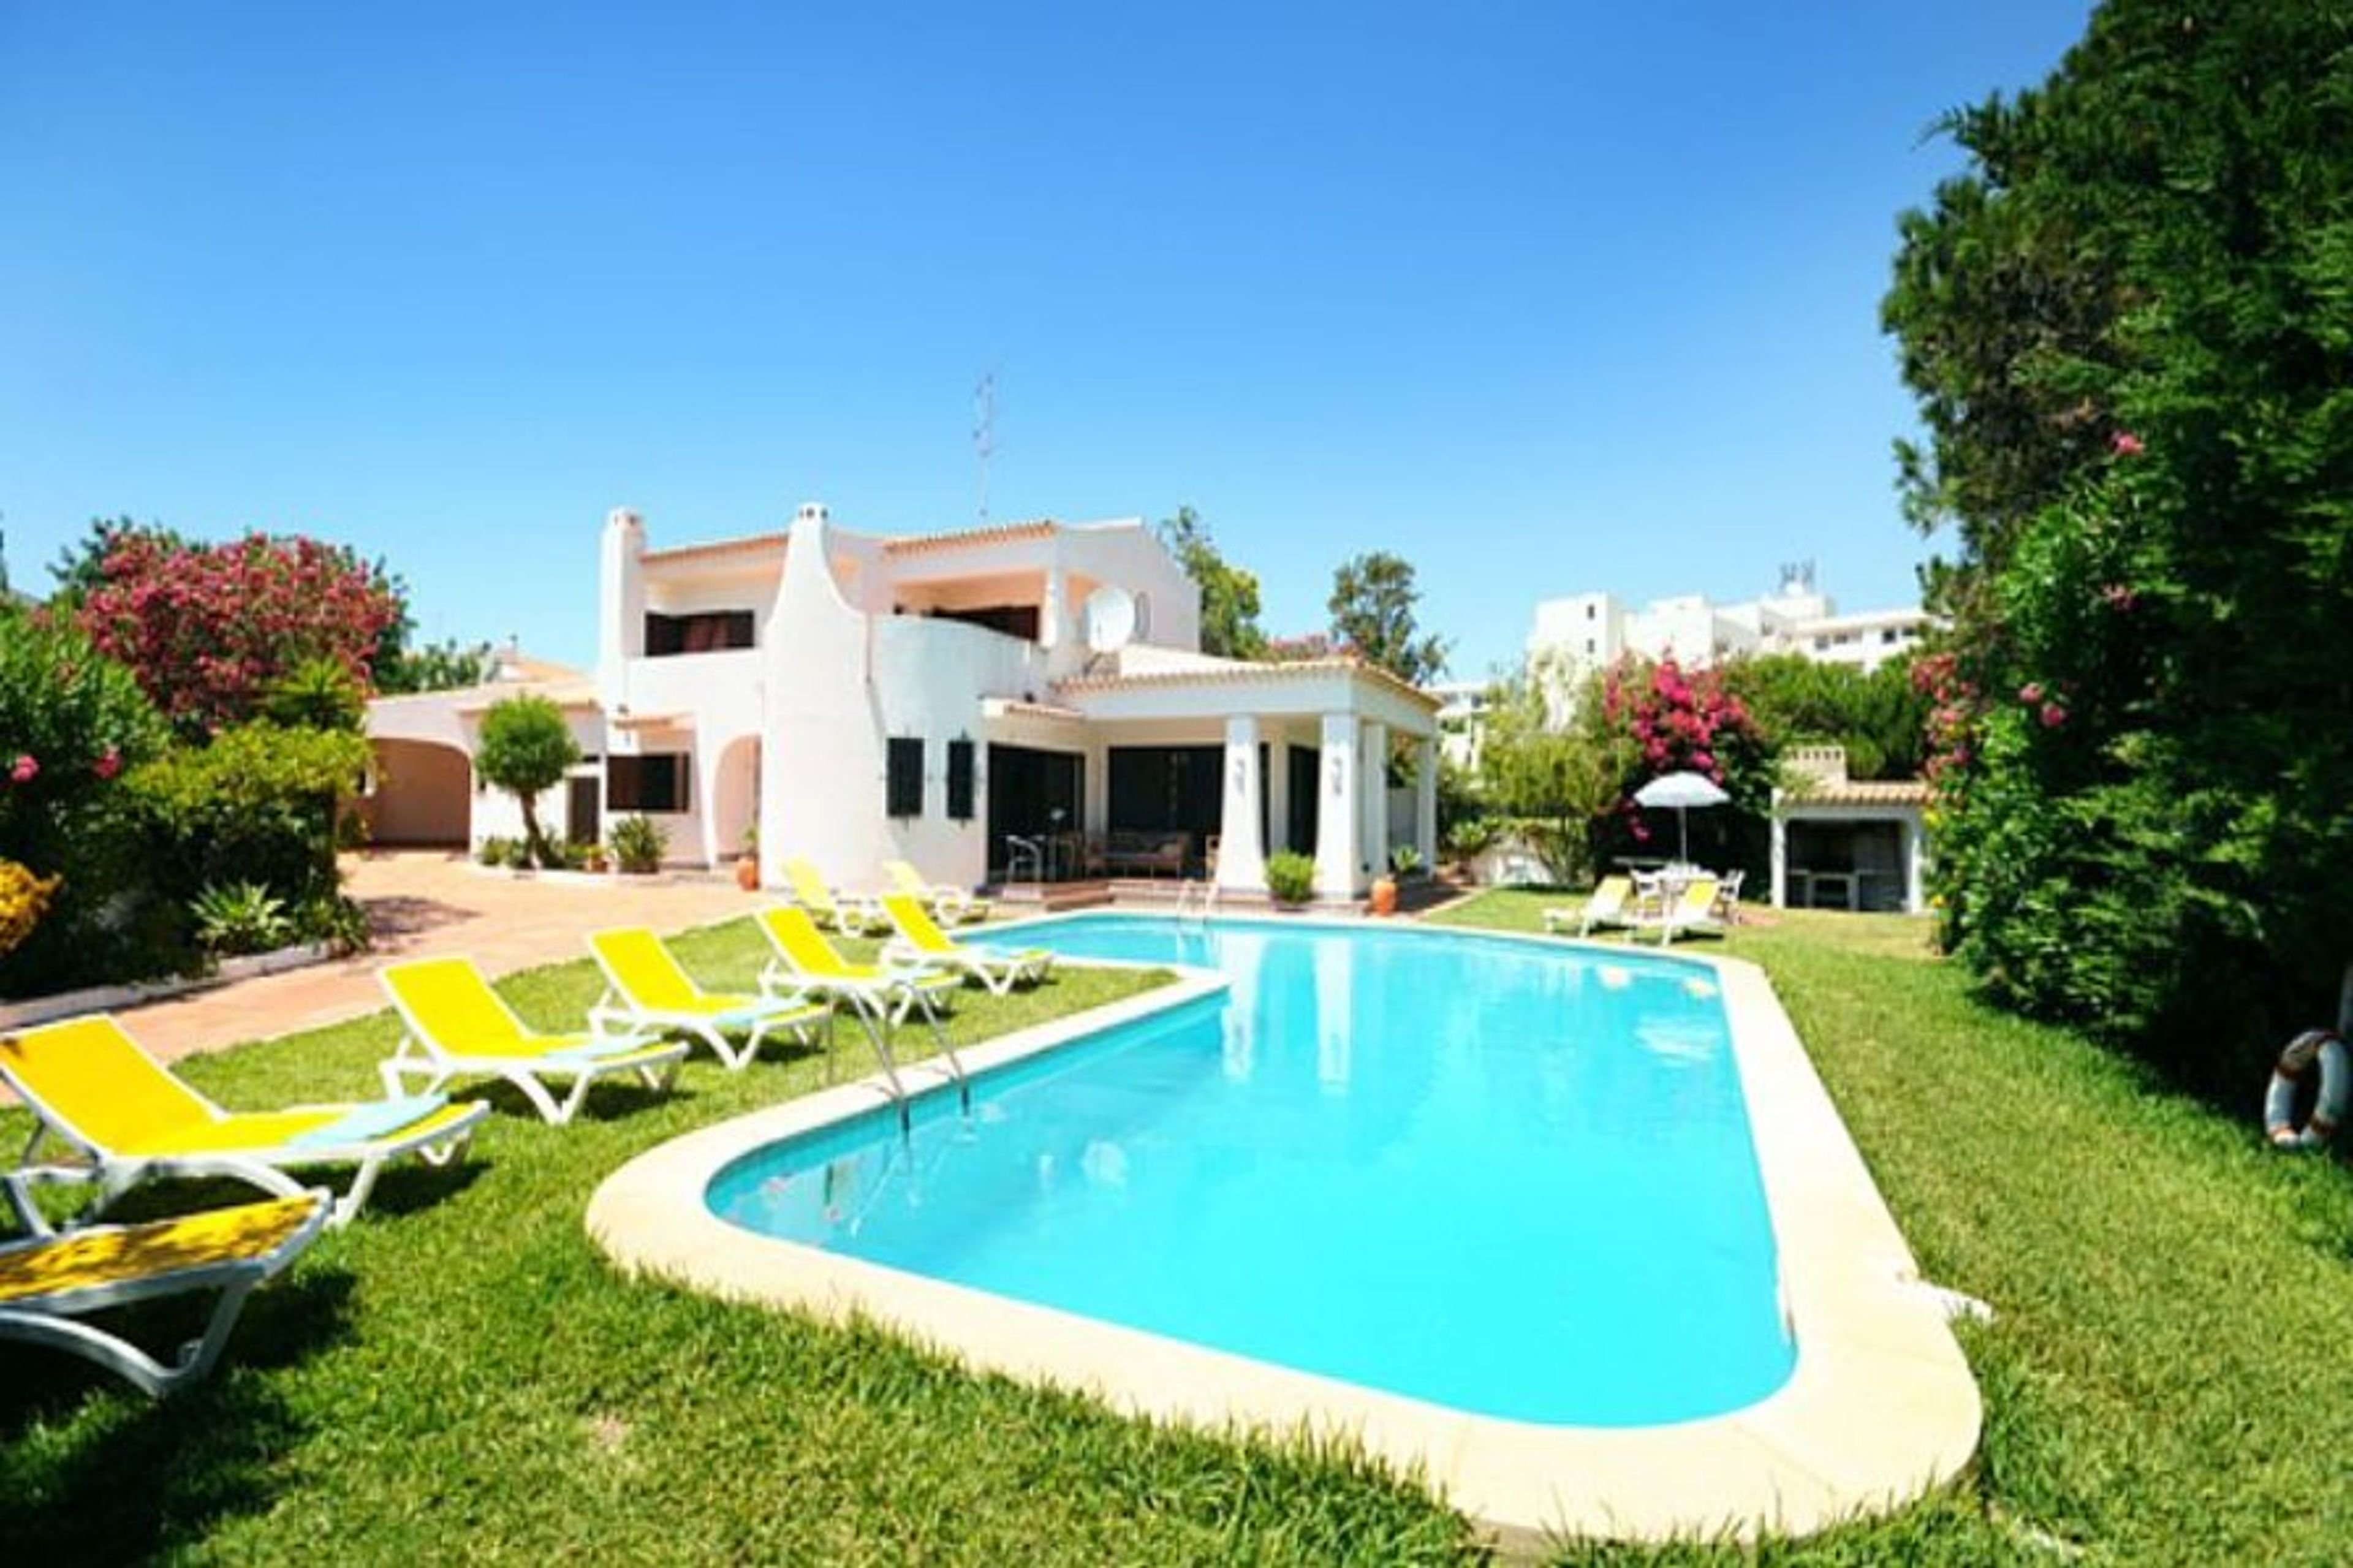 large pool with sunloungers to enjoy the sun uninterrupted throughout the day